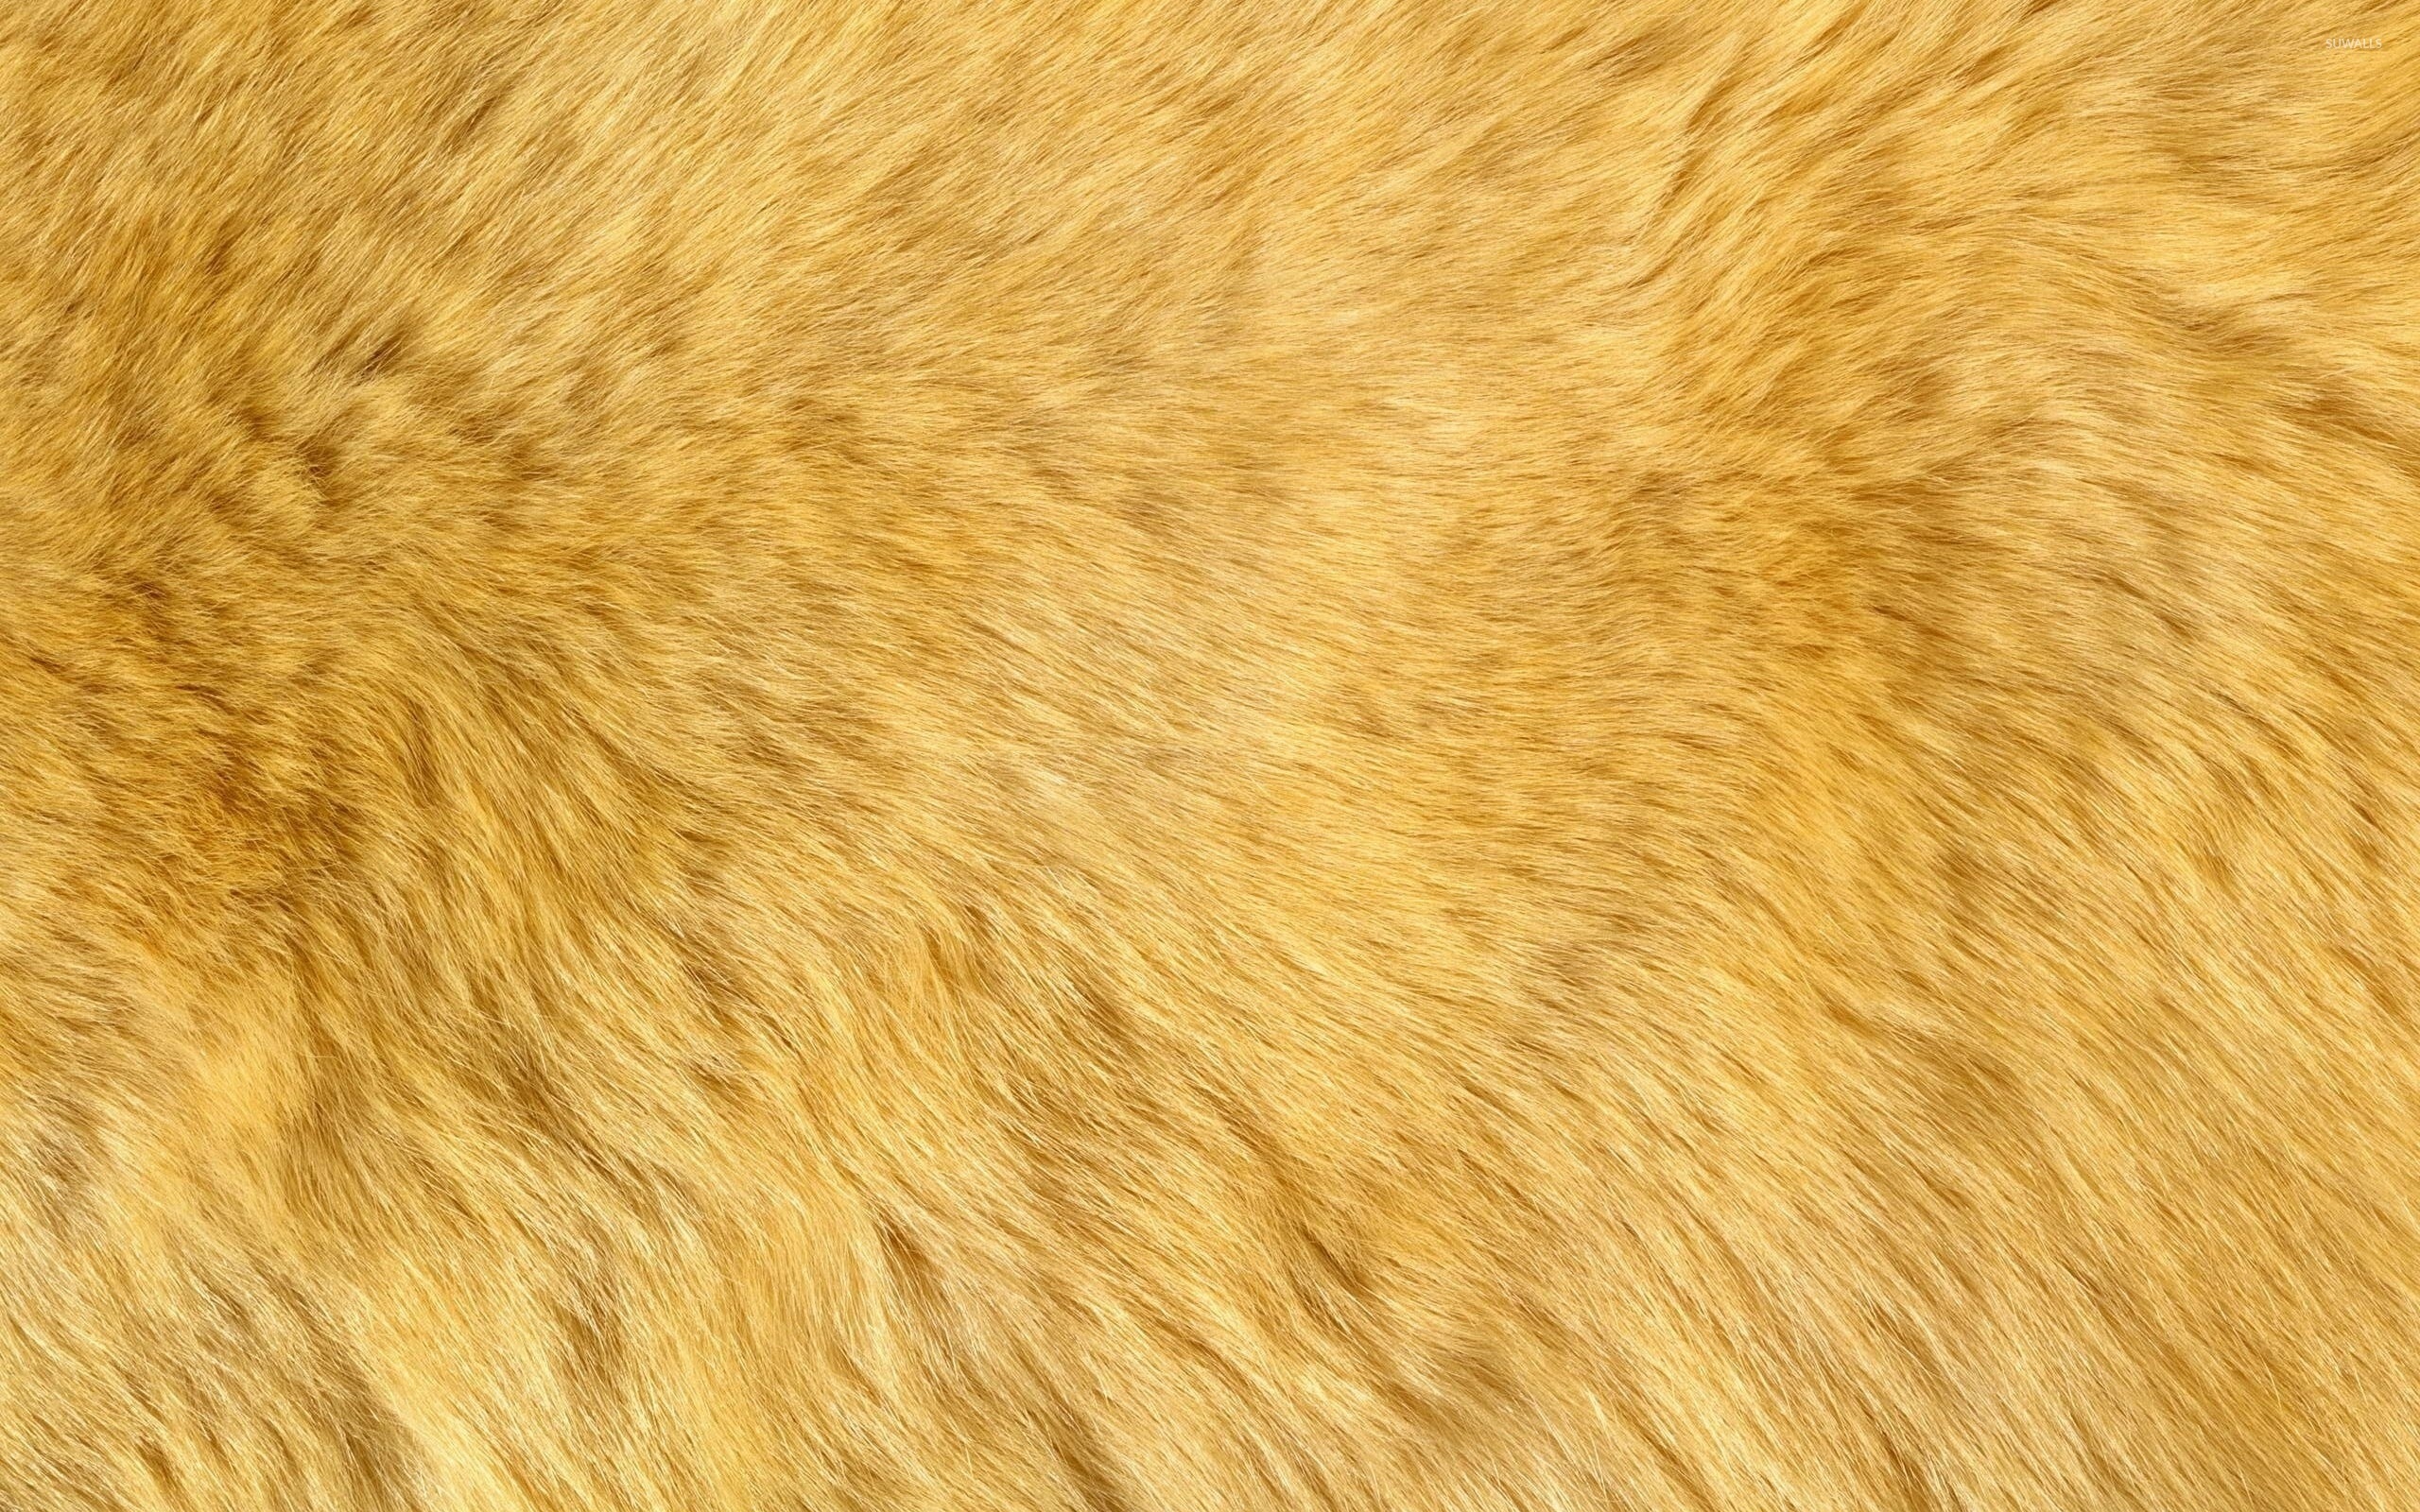 Ginger fur, Photography wallpapers, Textured background, Warm colors, 2560x1600 HD Desktop